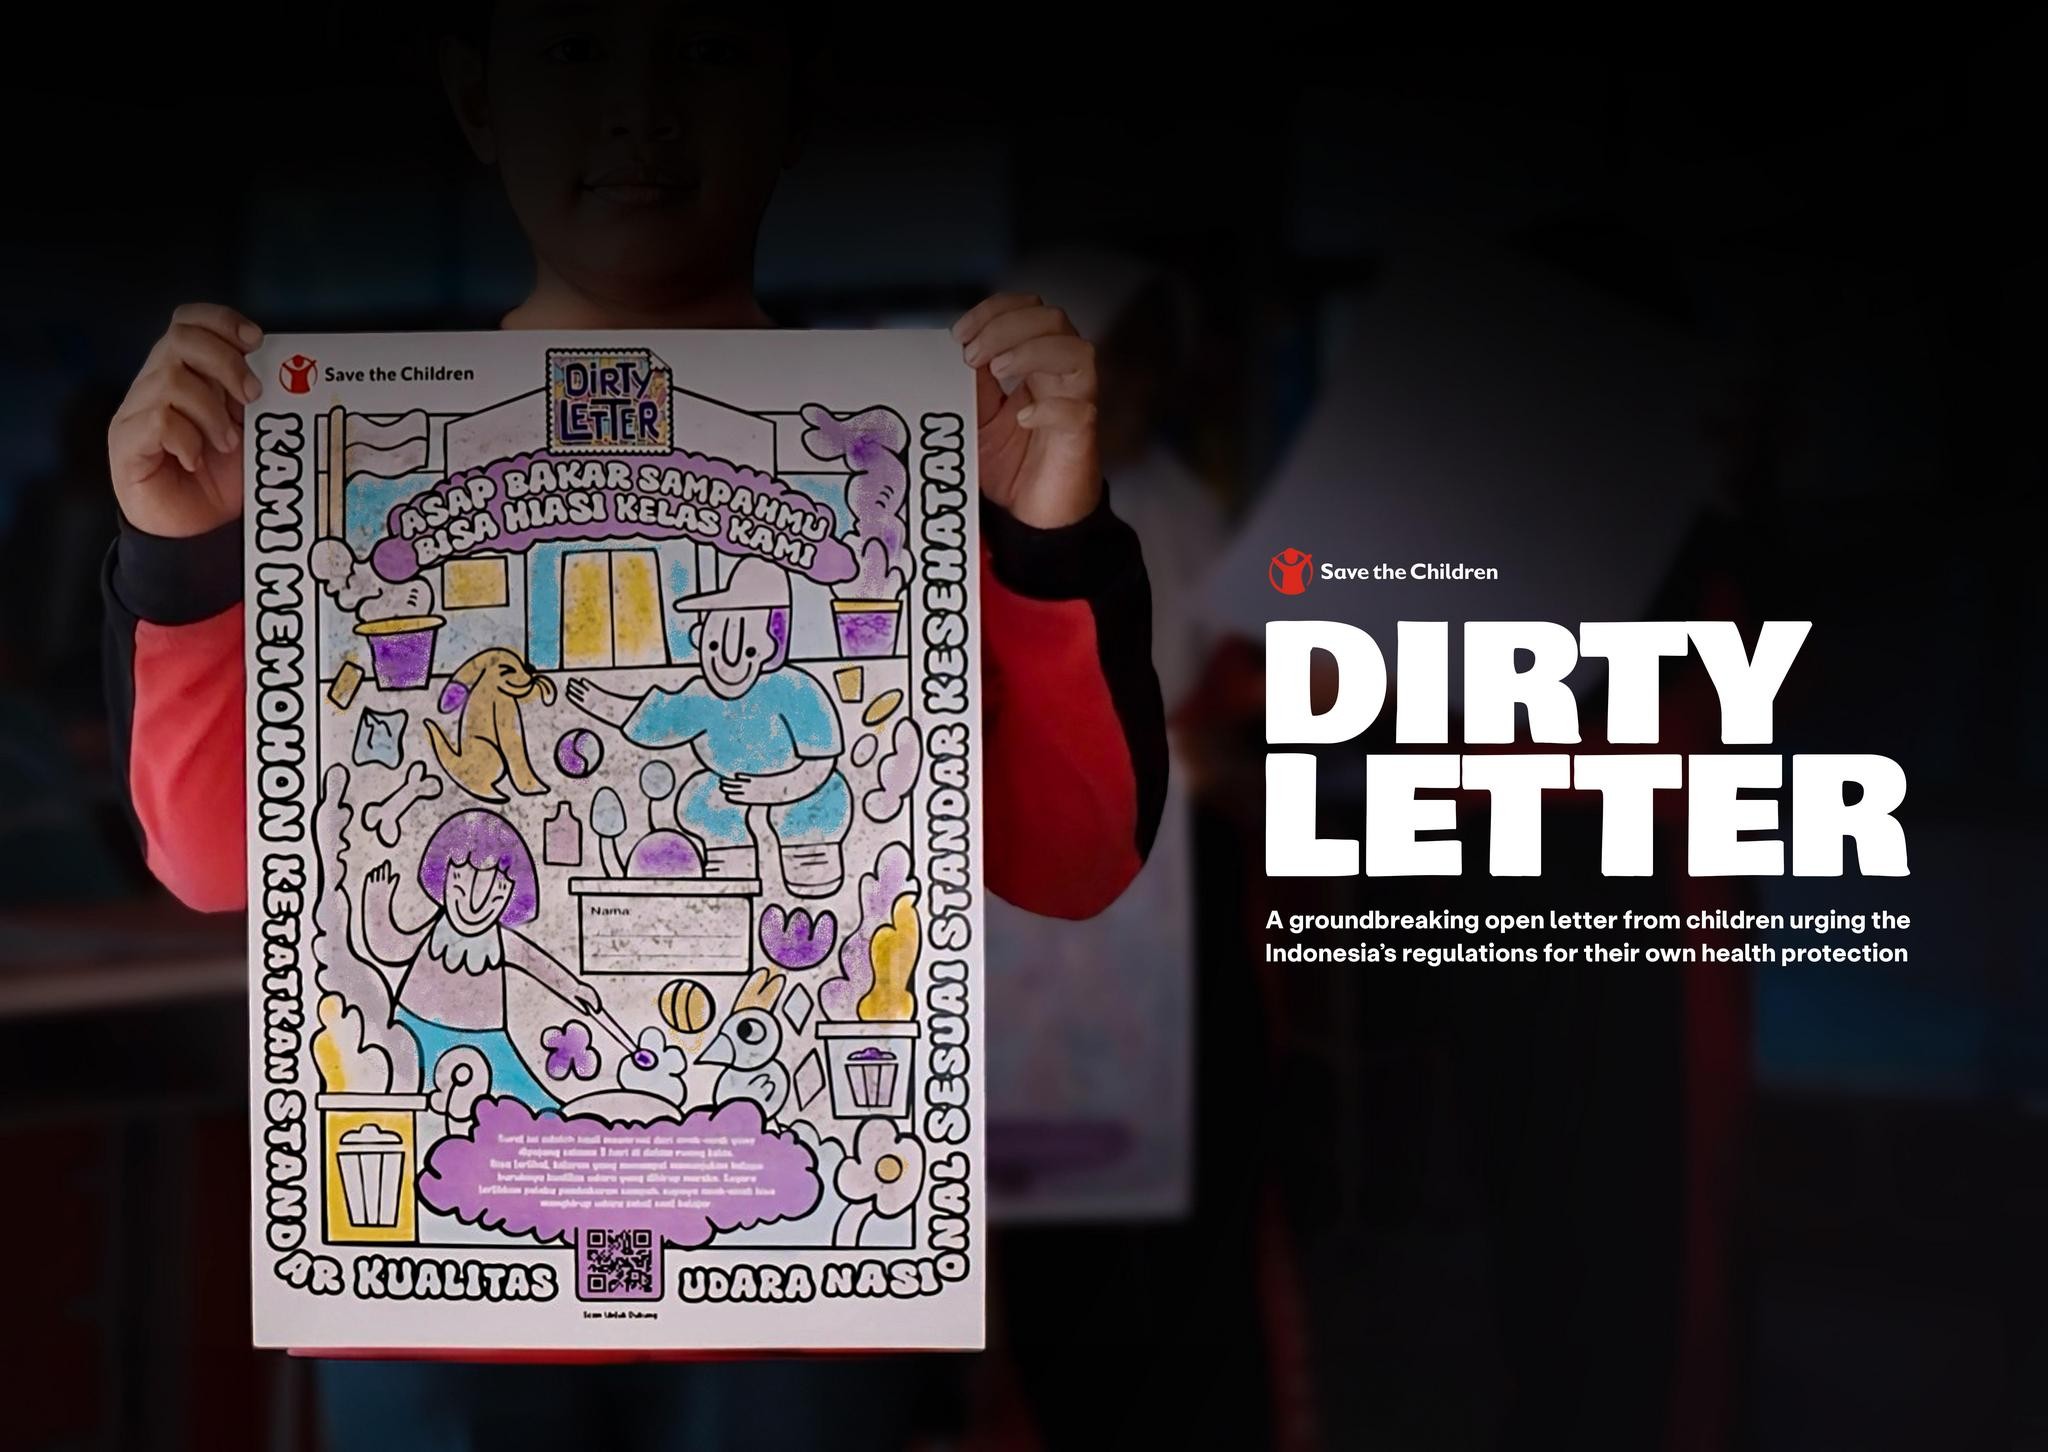 The Dirty Letter